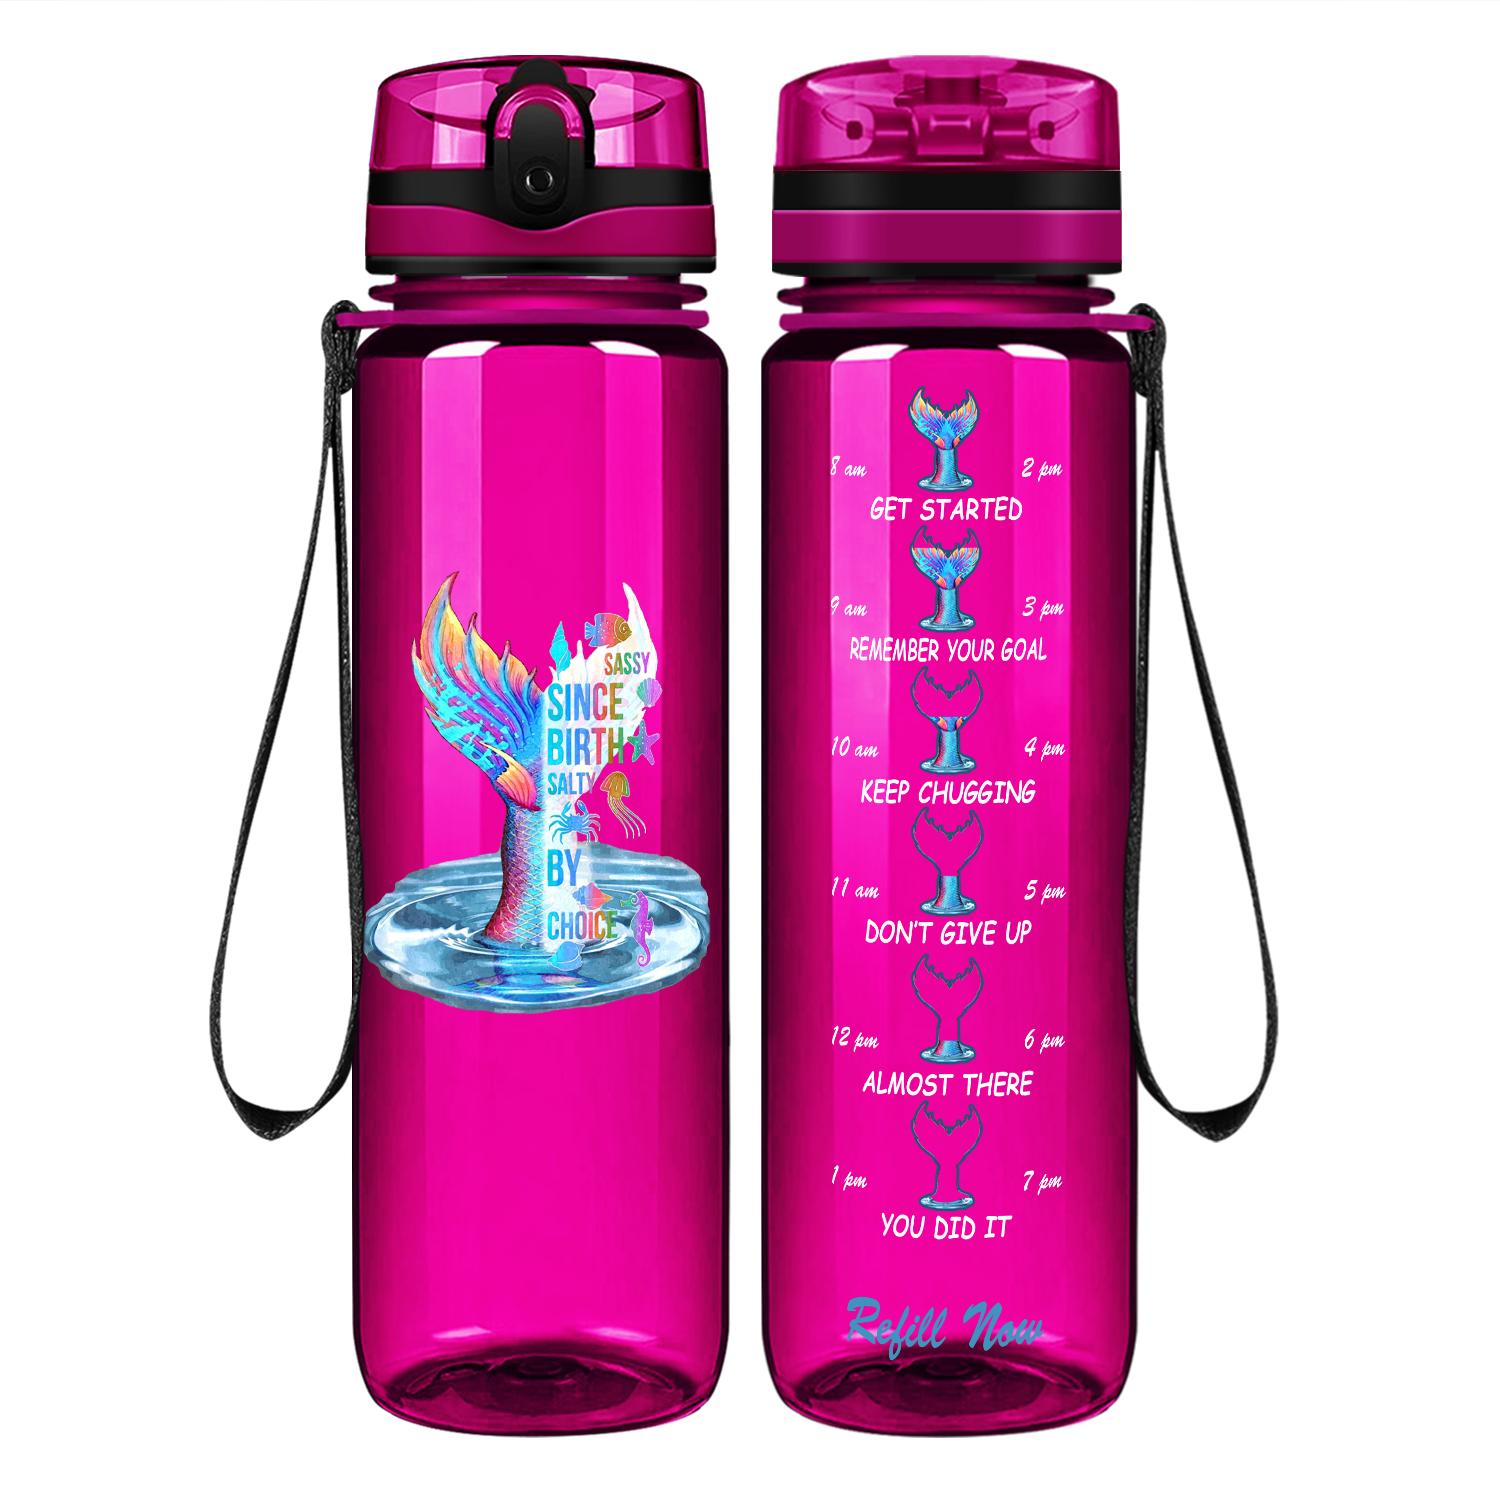 Personalized Sassy Since Birth on 32 oz Motivational Tracking Water Bottle